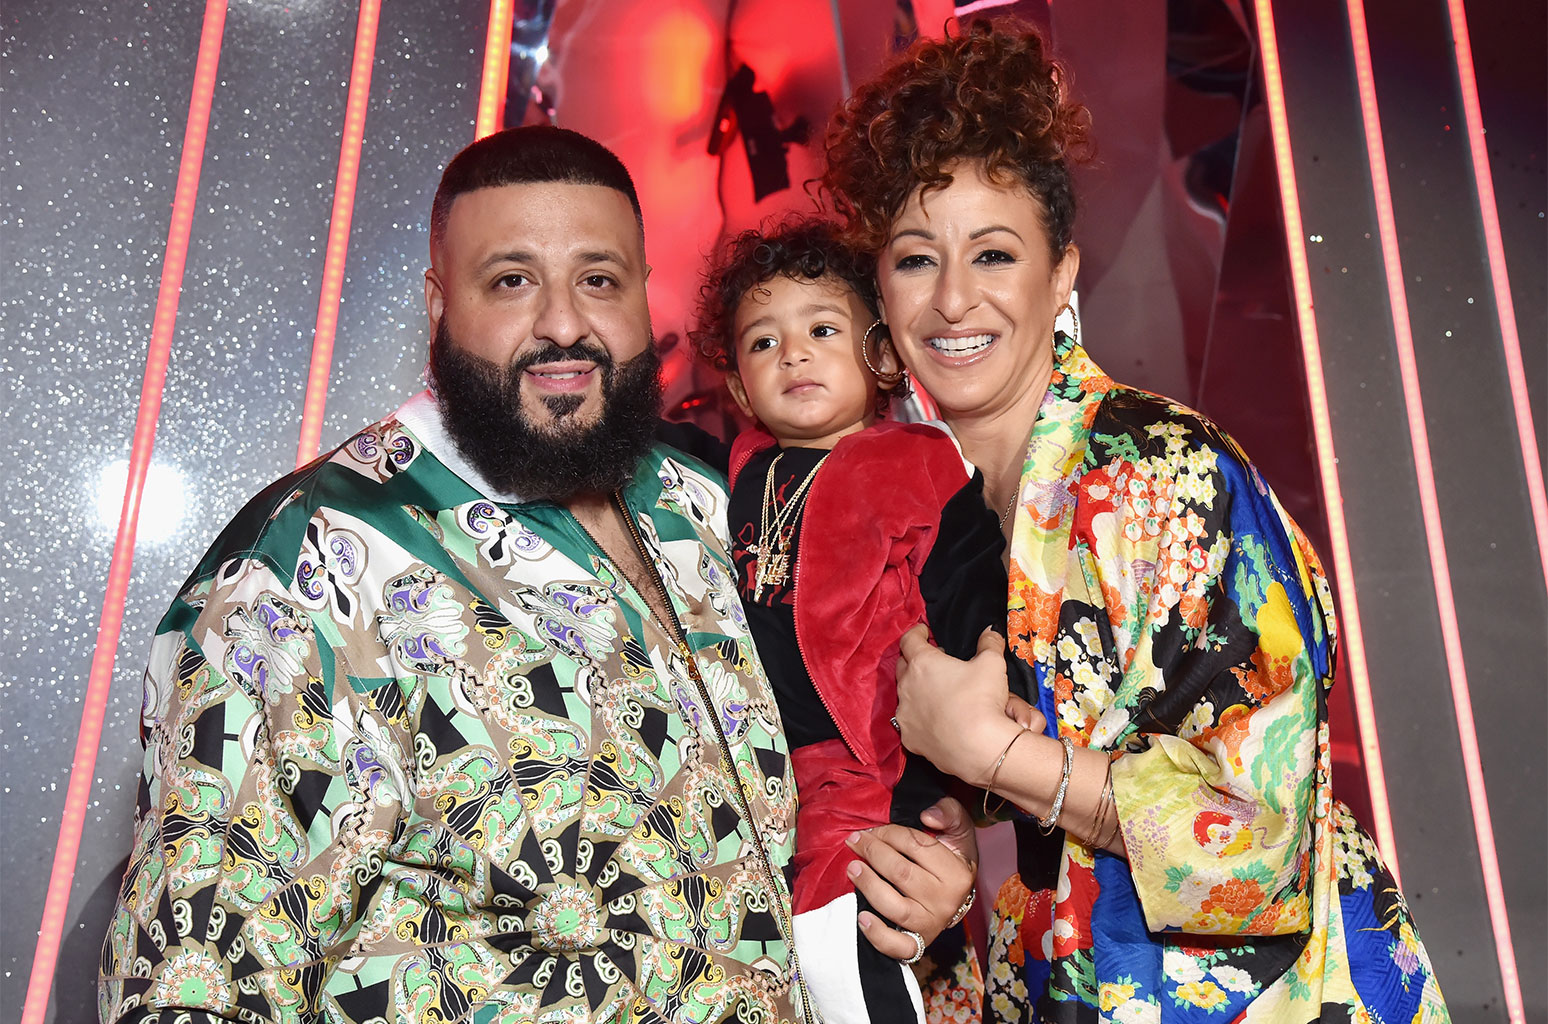 'Another One': DJ Khaled & His Wife Nicole Tuck Welcome Second Child